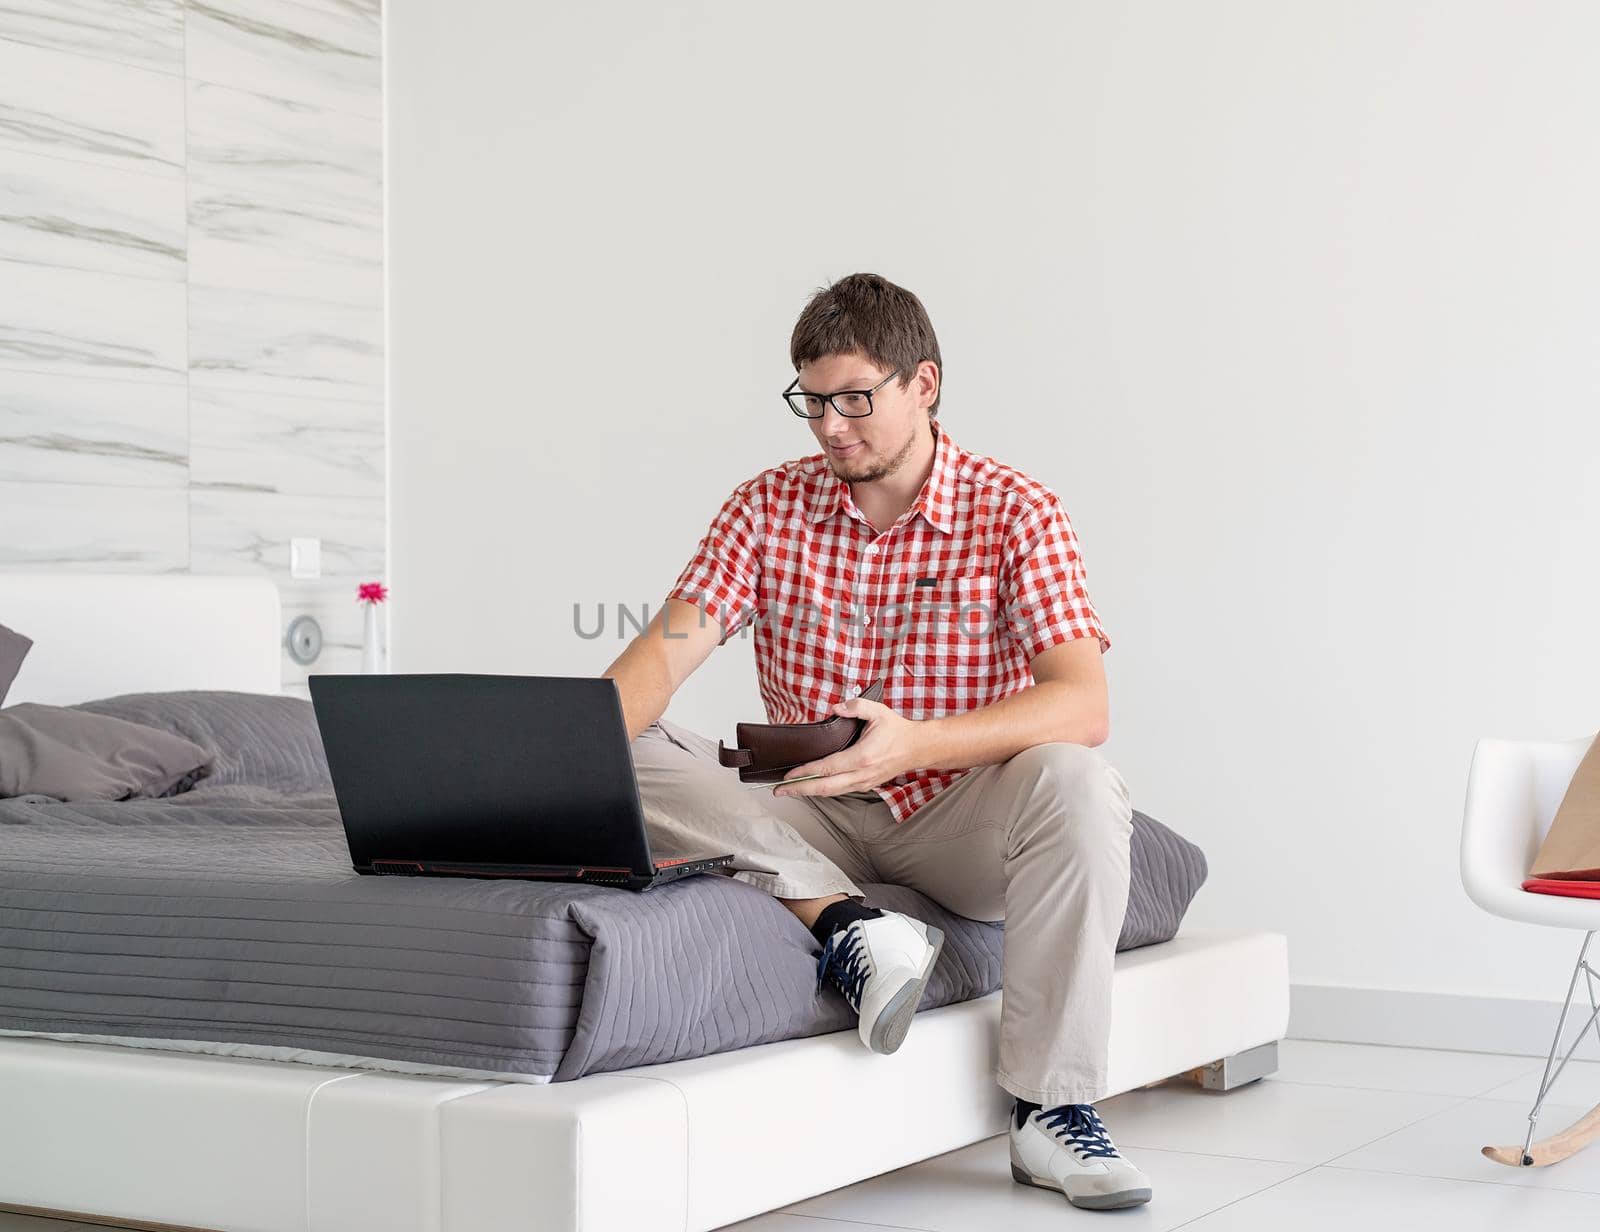 Online shopping concept. Young man sitting on the bed and shopping online using tablet holding a wallet, copy space